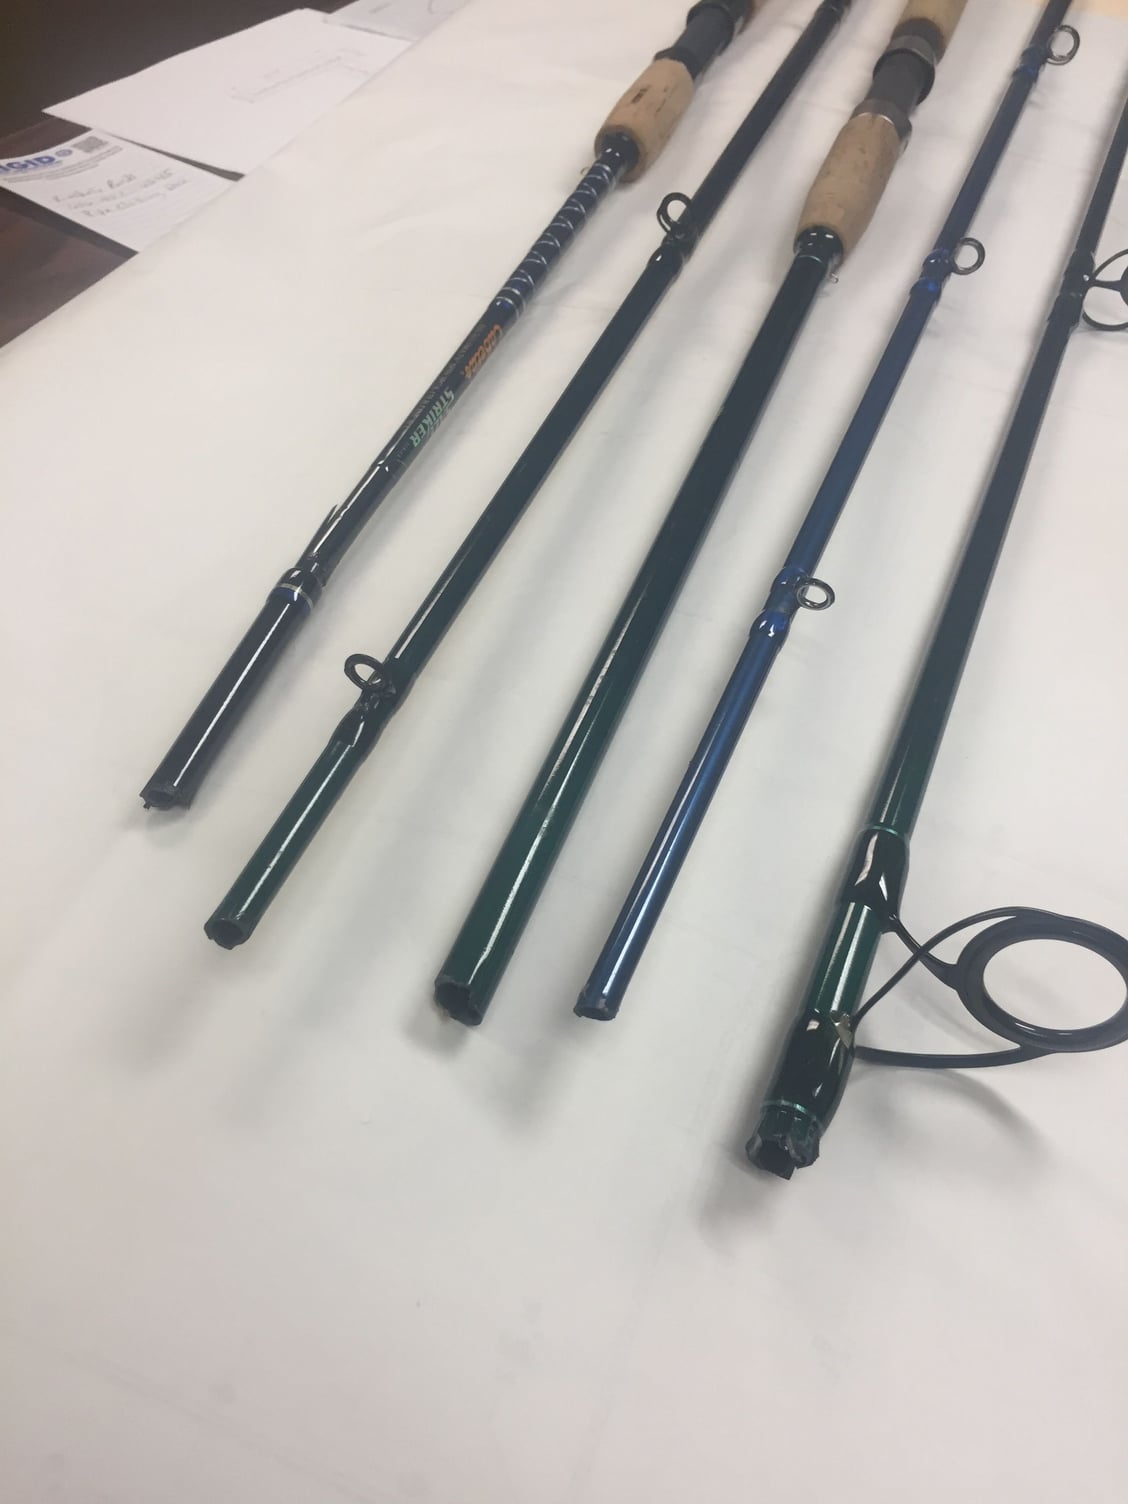 Rod shipping in PVC tubes - The Hull Truth - Boating and Fishing Forum